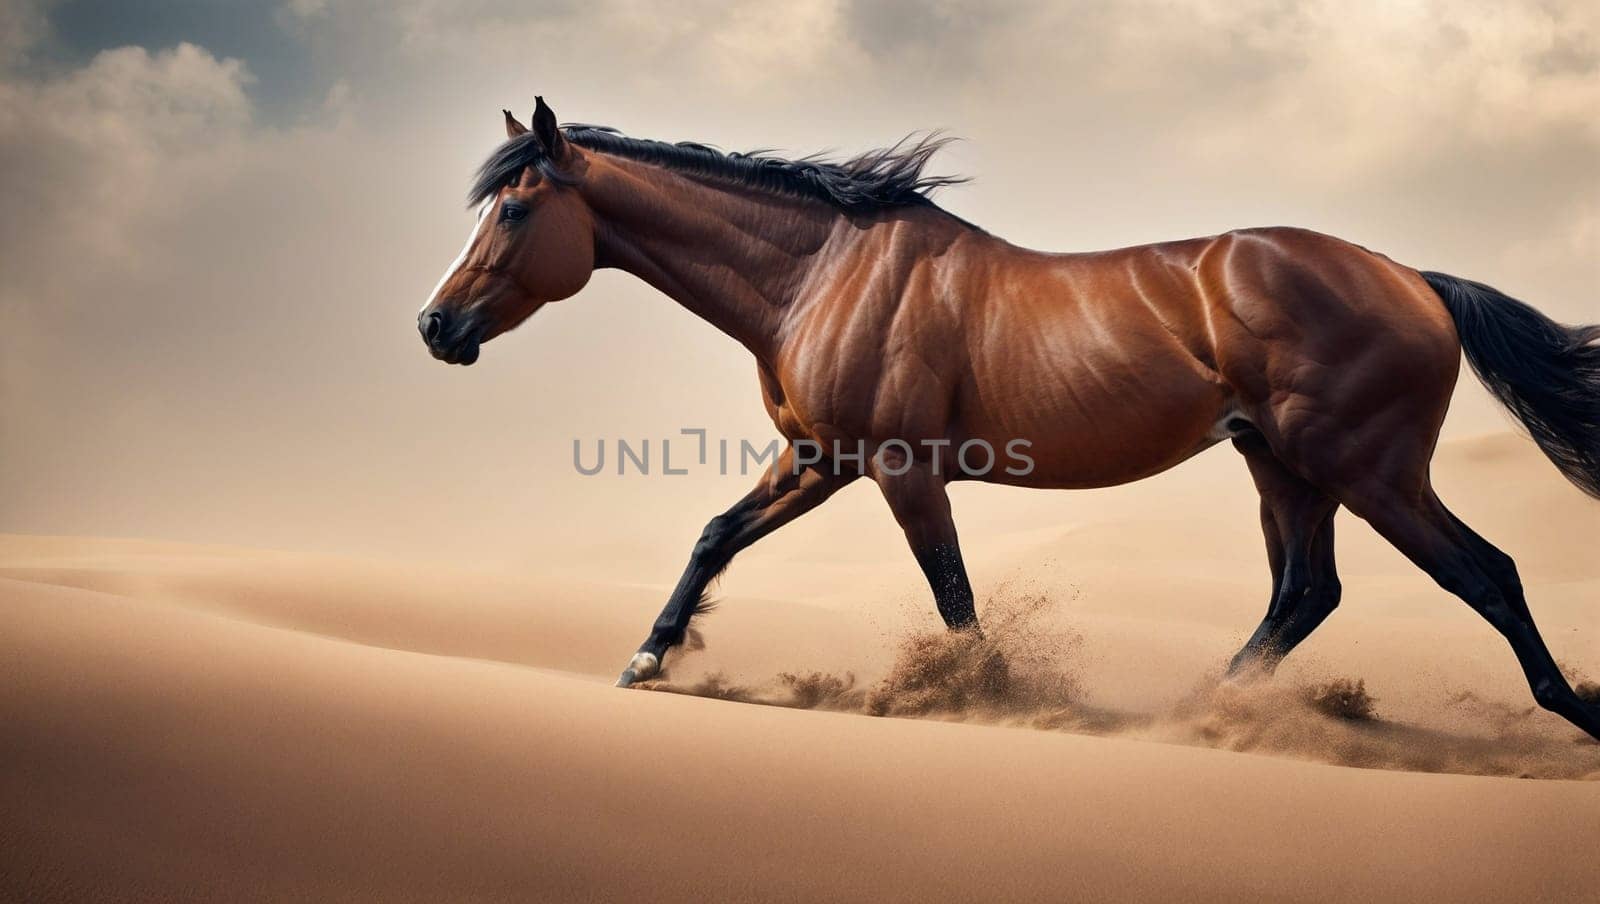 A powerful horse races across the sandy terrain with stunning cloud formations in the background.